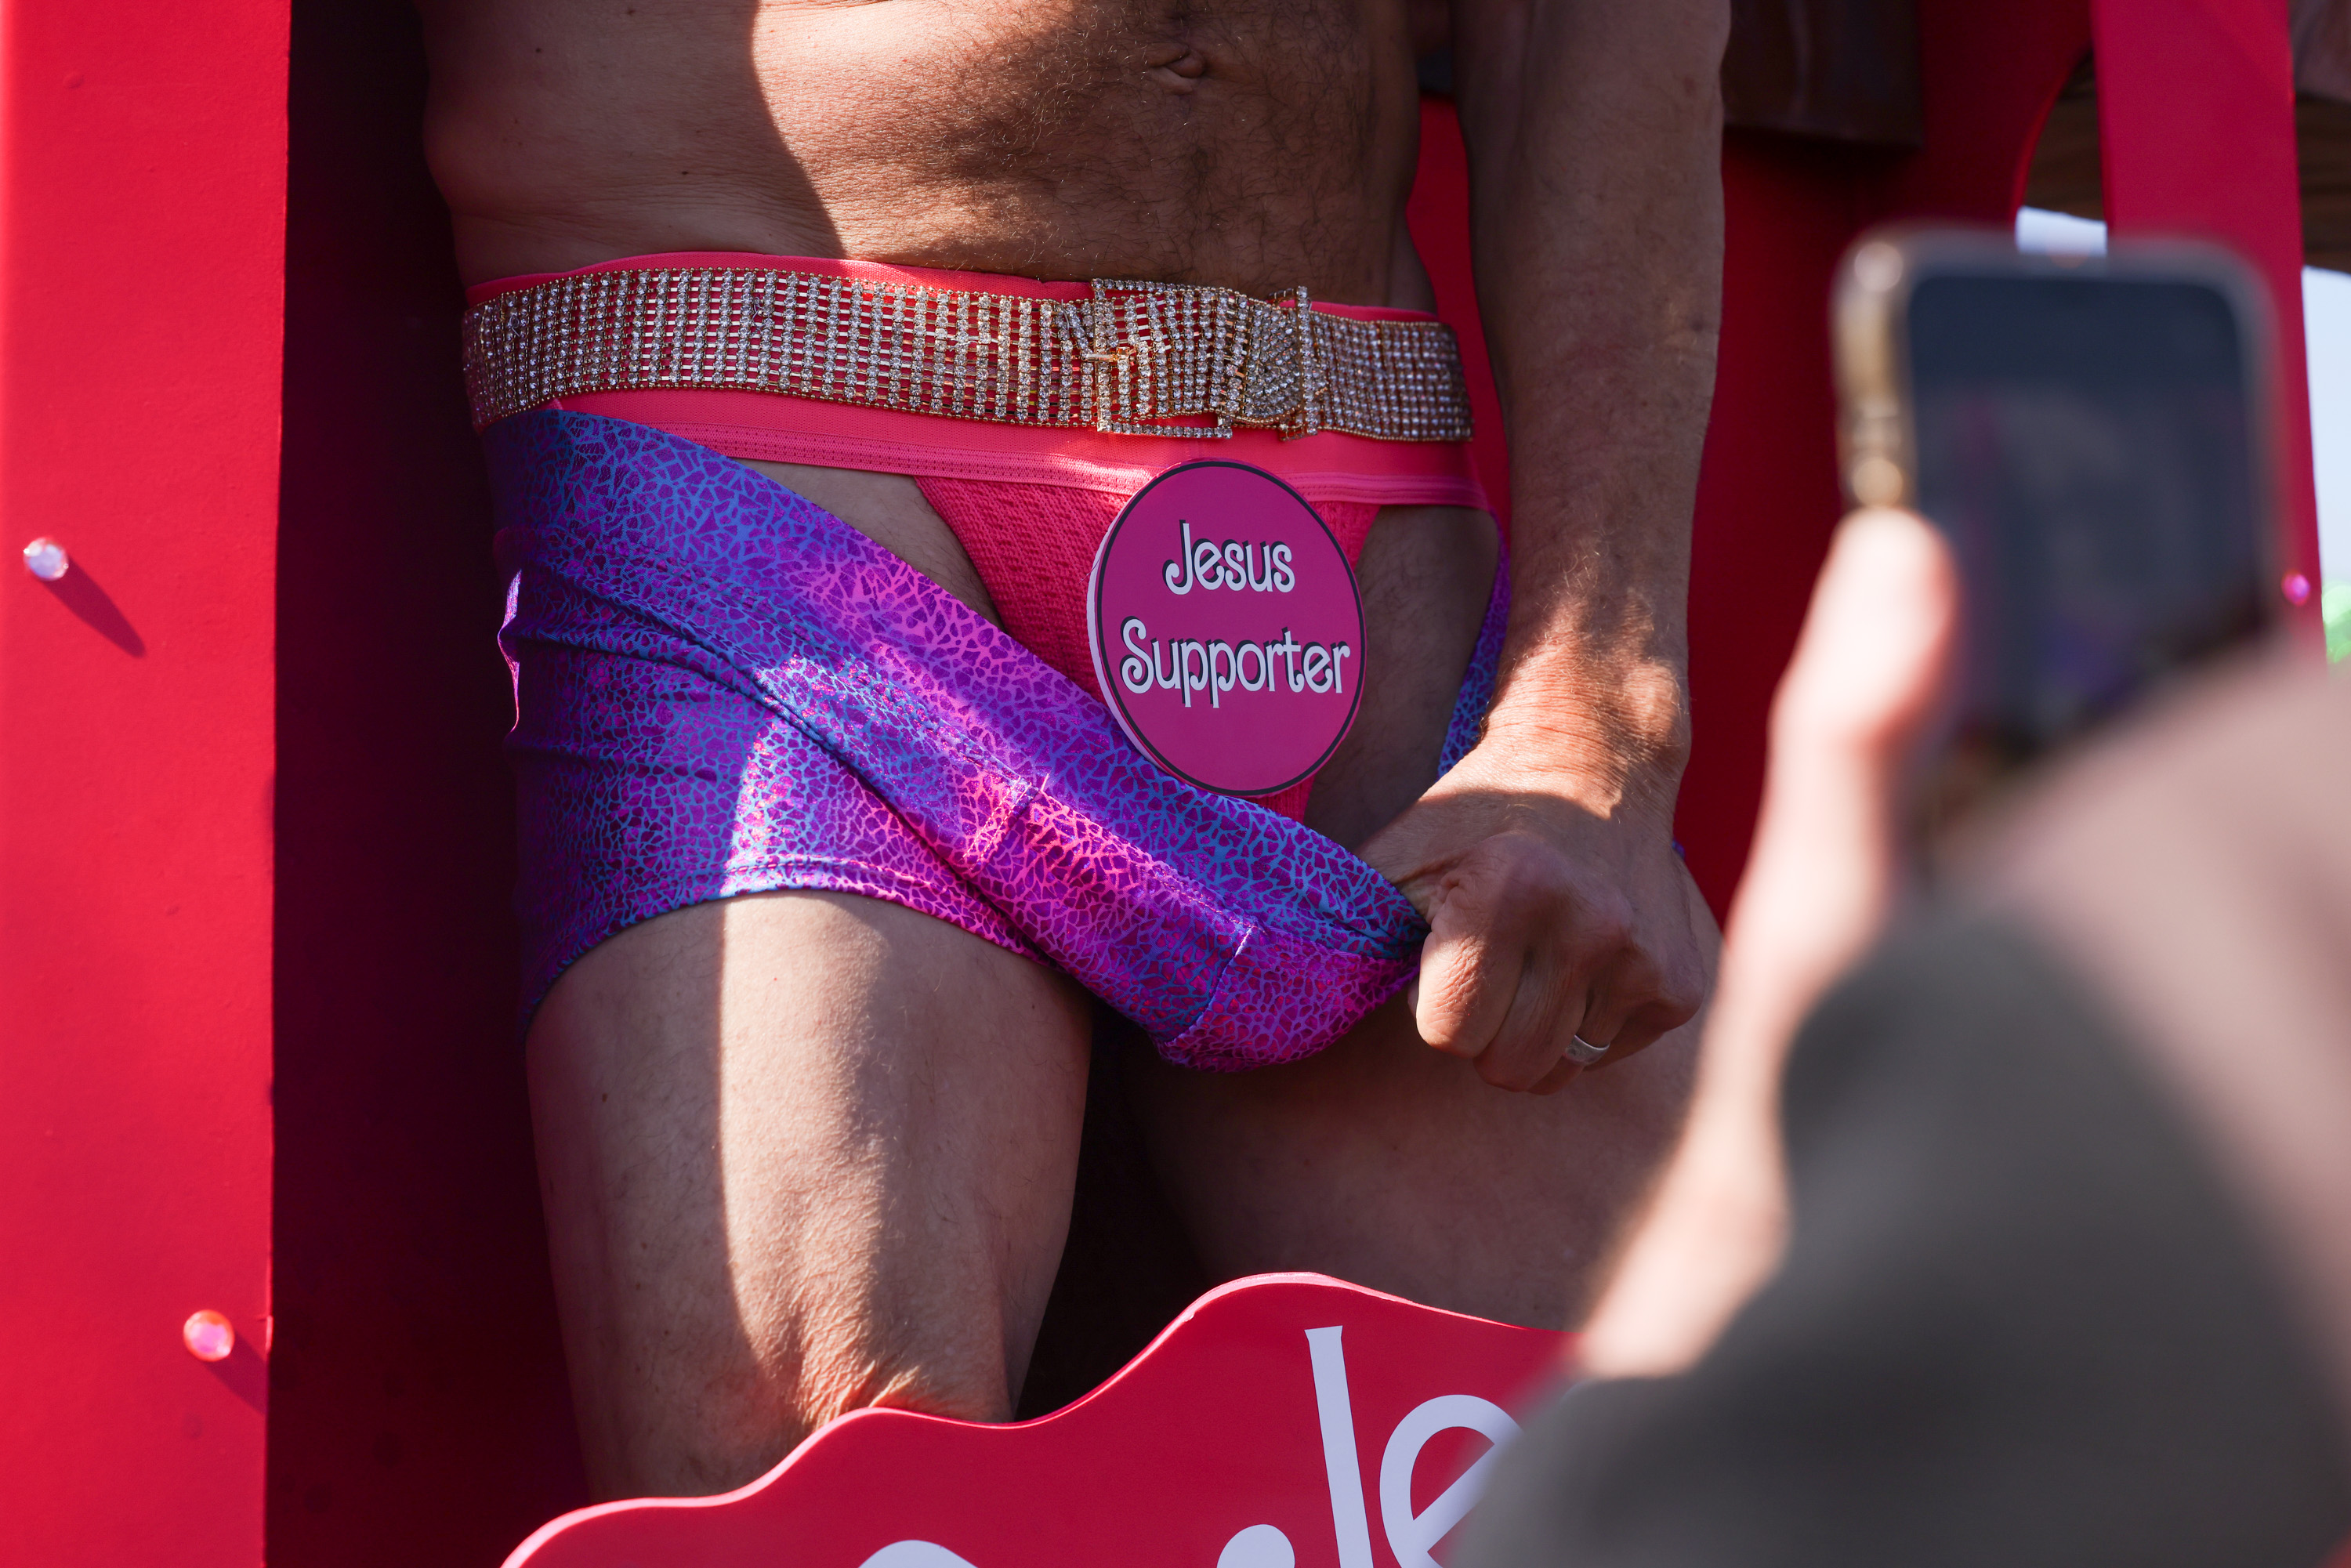 A person is wearing a pink, bedazzled belt with a &quot;Jesus Supporter&quot; badge and a purple garment. A smartphone is capturing the scene.